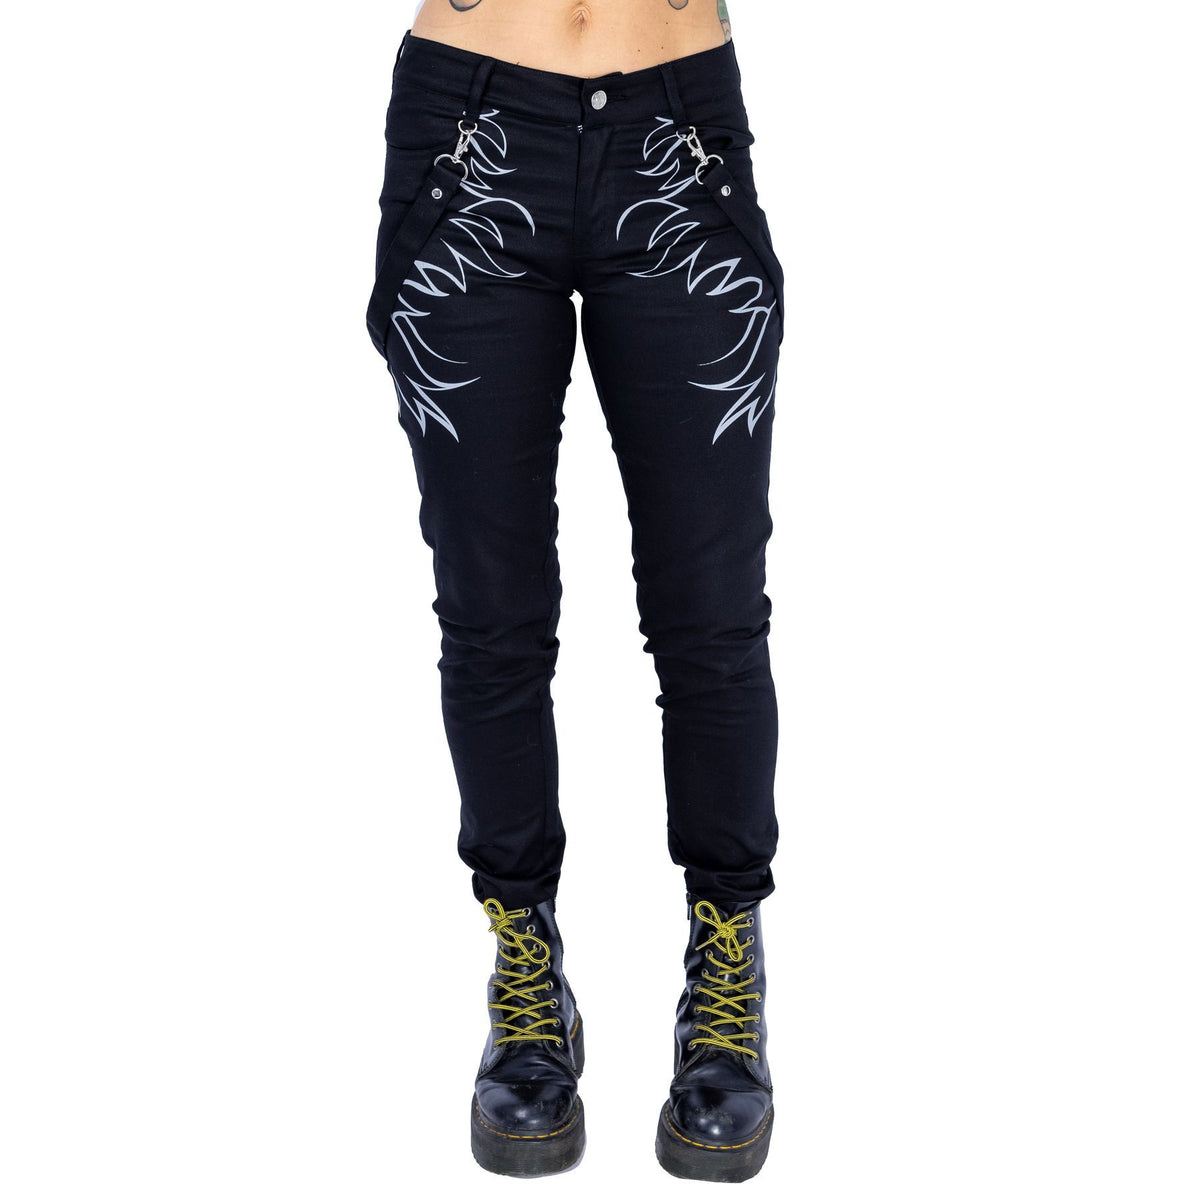 Heartless Inferno Pant | Black